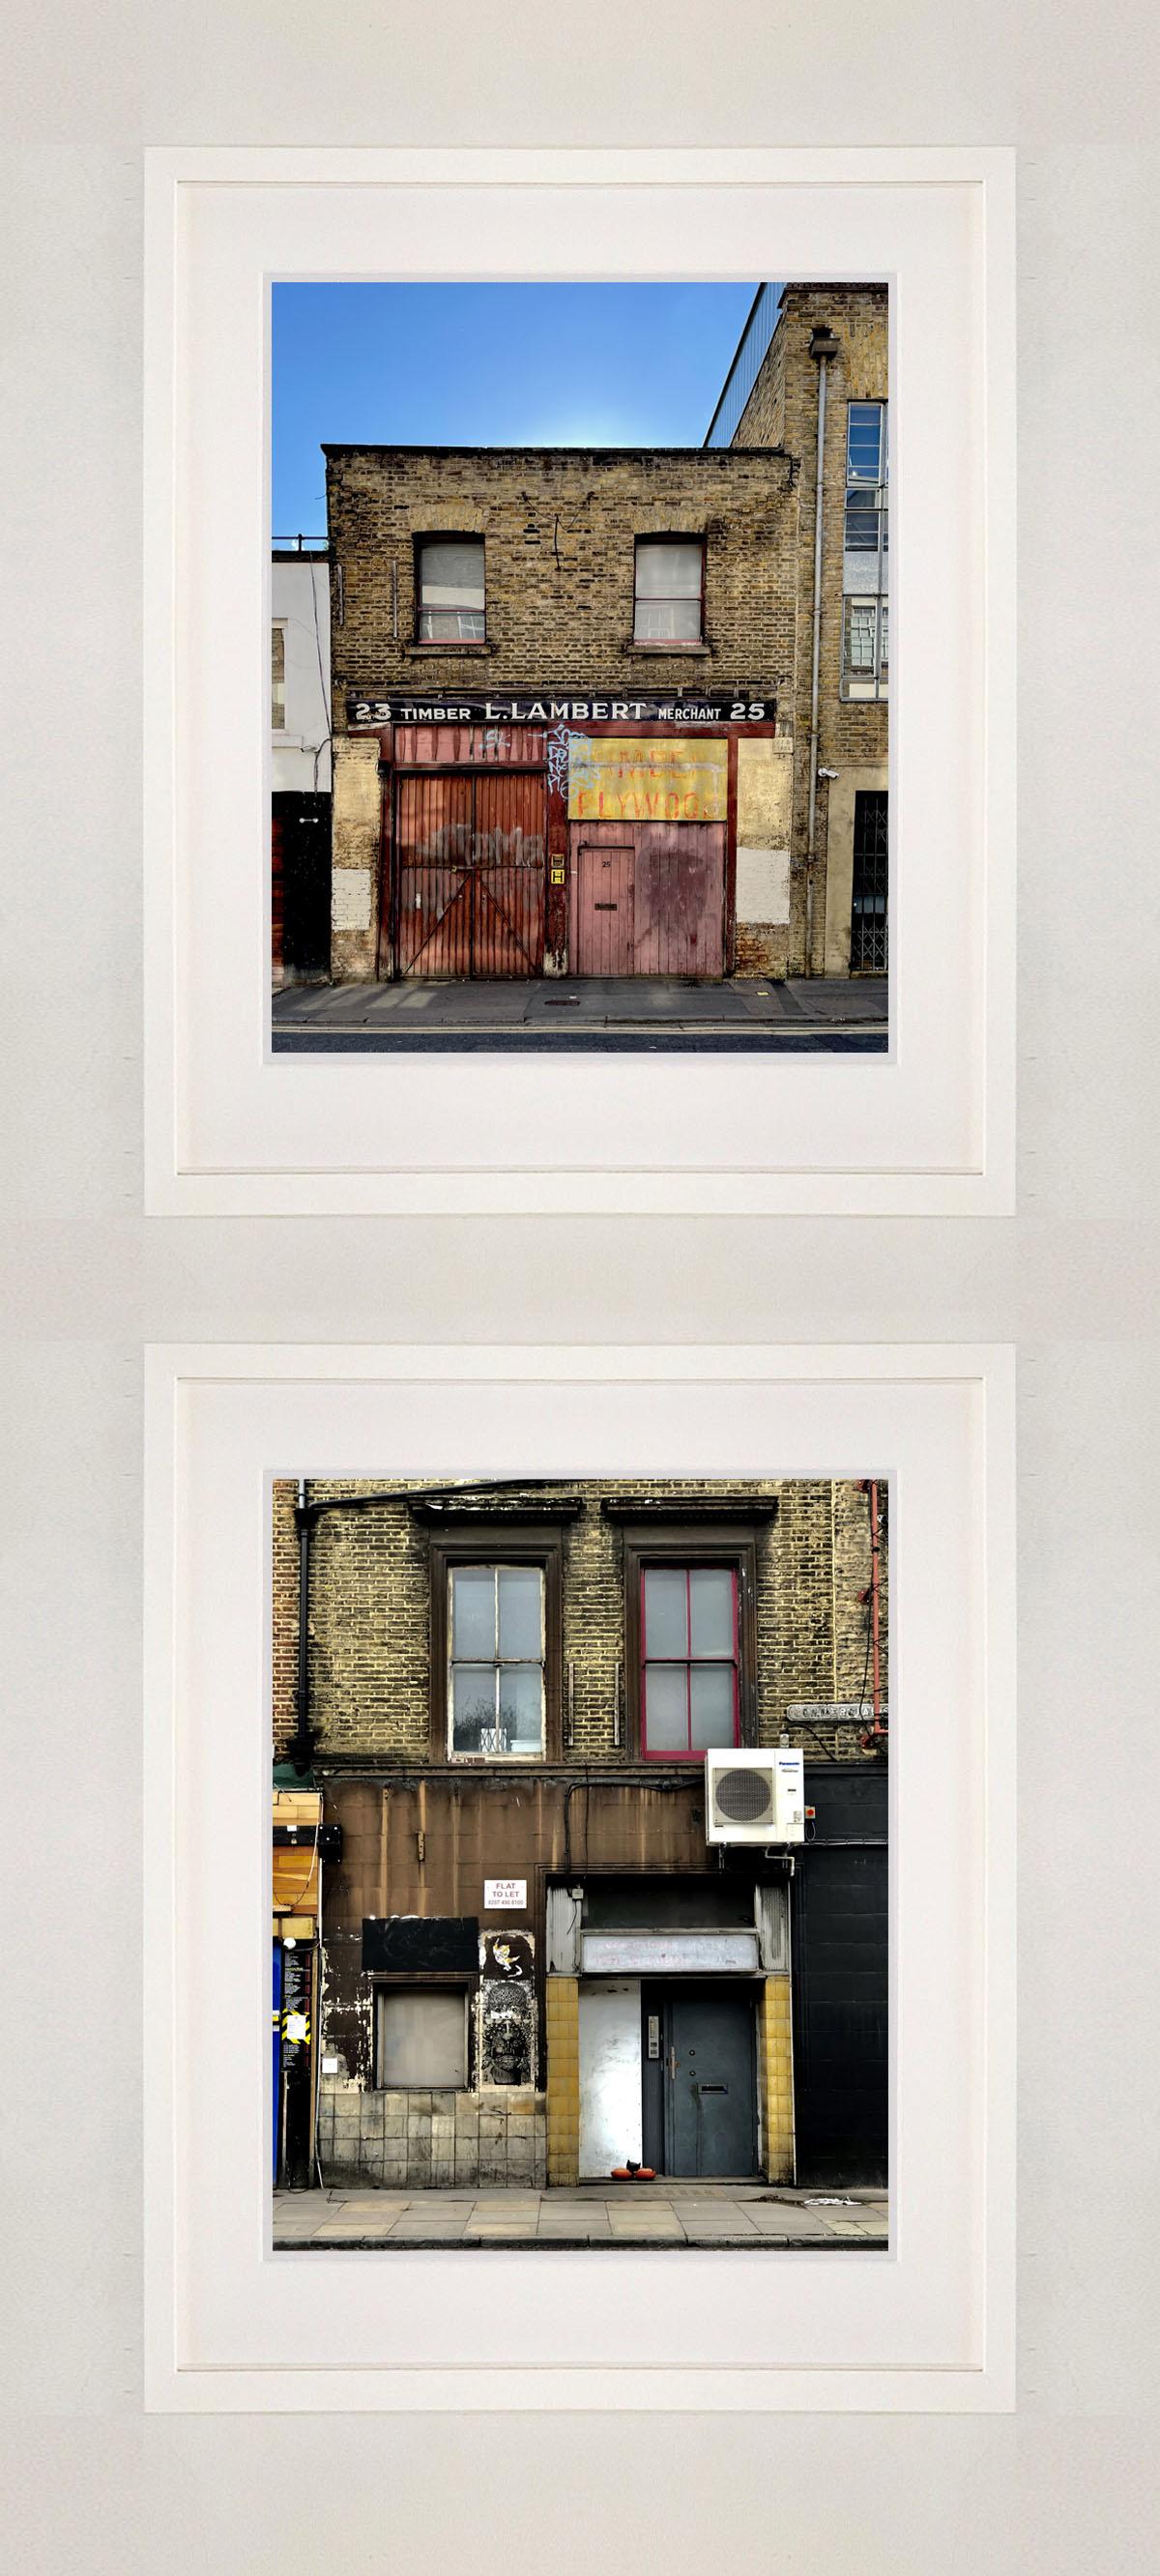 'Timber Merchant', East London street photography from Richard Heeps' series A Short History of London.

This artwork is a limited edition of 25 gloss photographic print, dry-mounted to aluminium, presented in a museum board white window mount and a